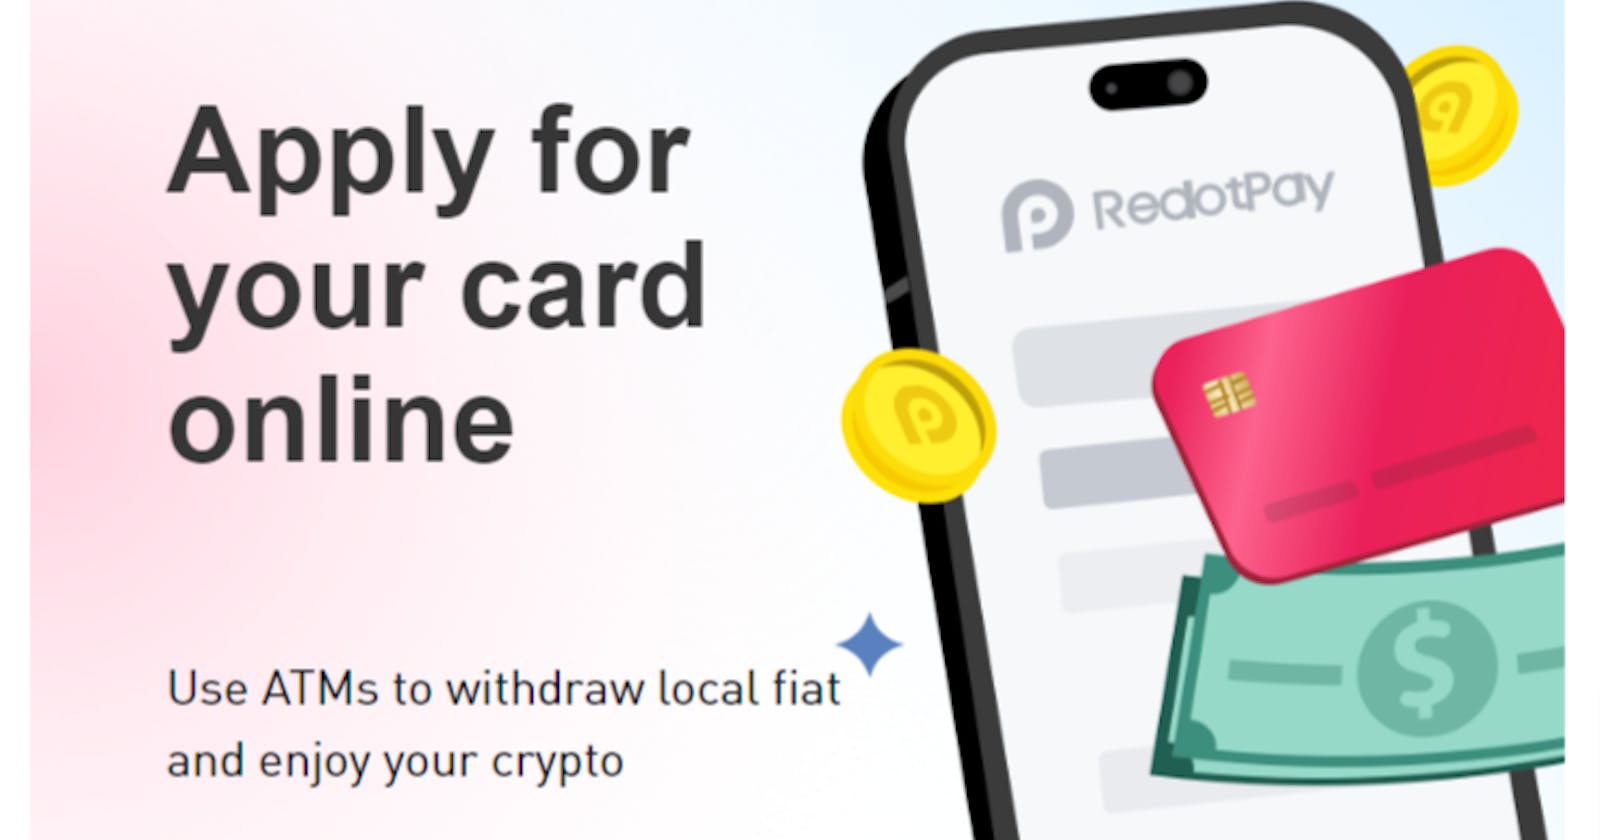 Steps to deposit money into your RedotPay account